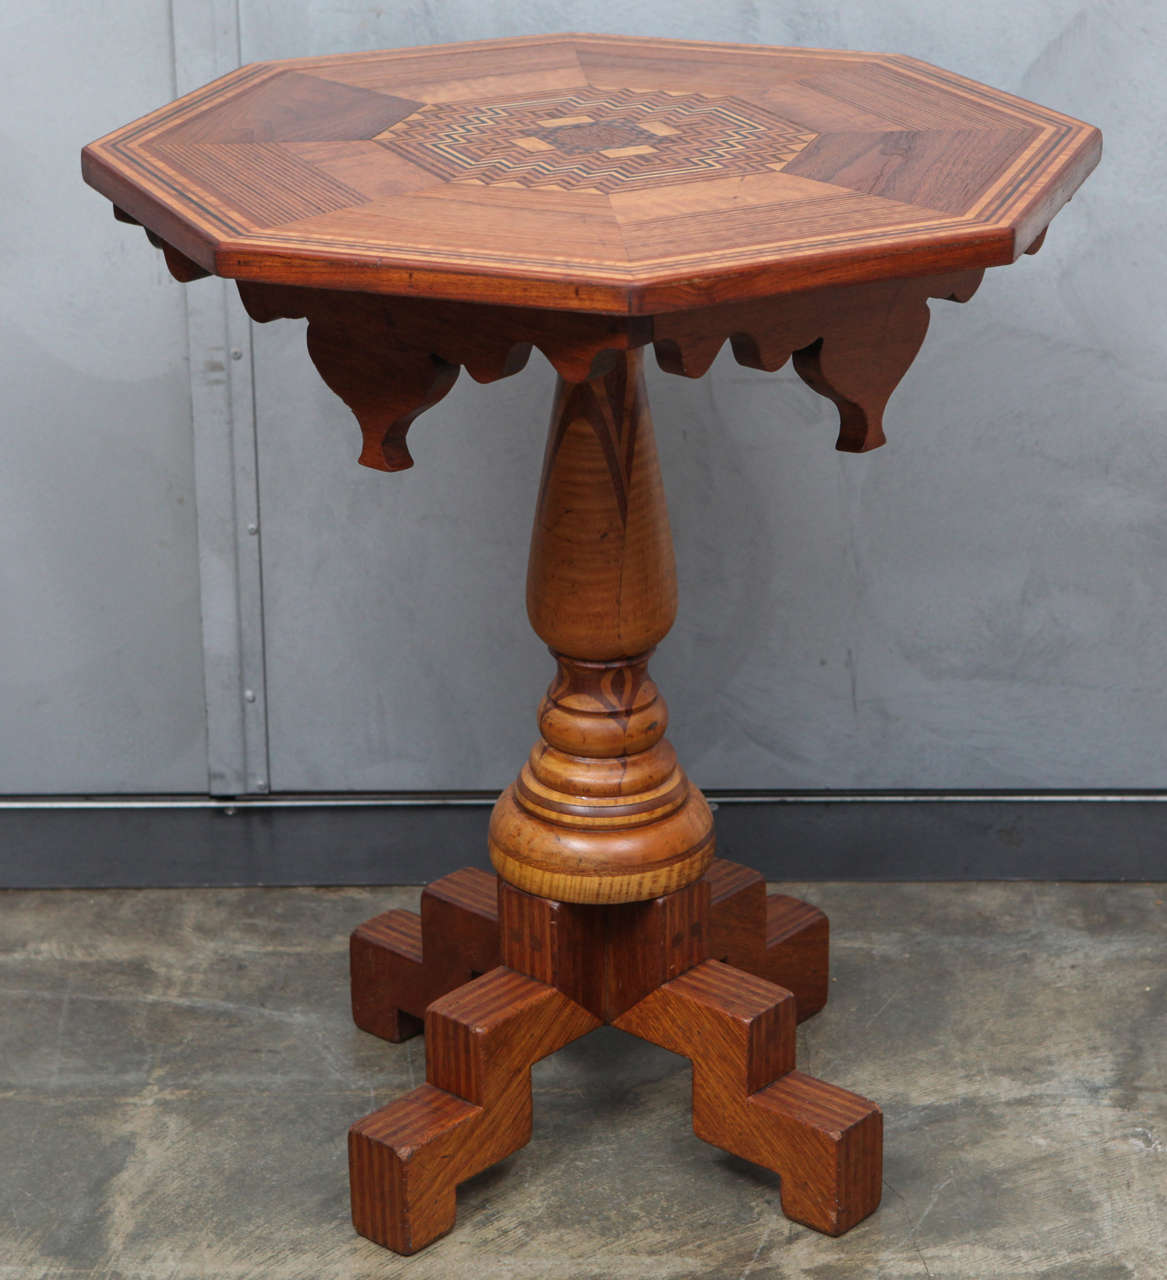 This eight sided American folk art table has great parquetry details in an impressive geometric pattern and inlay work that is used throughout. The table stands on a center column is turned with inlay details which create beautiful graceful lines